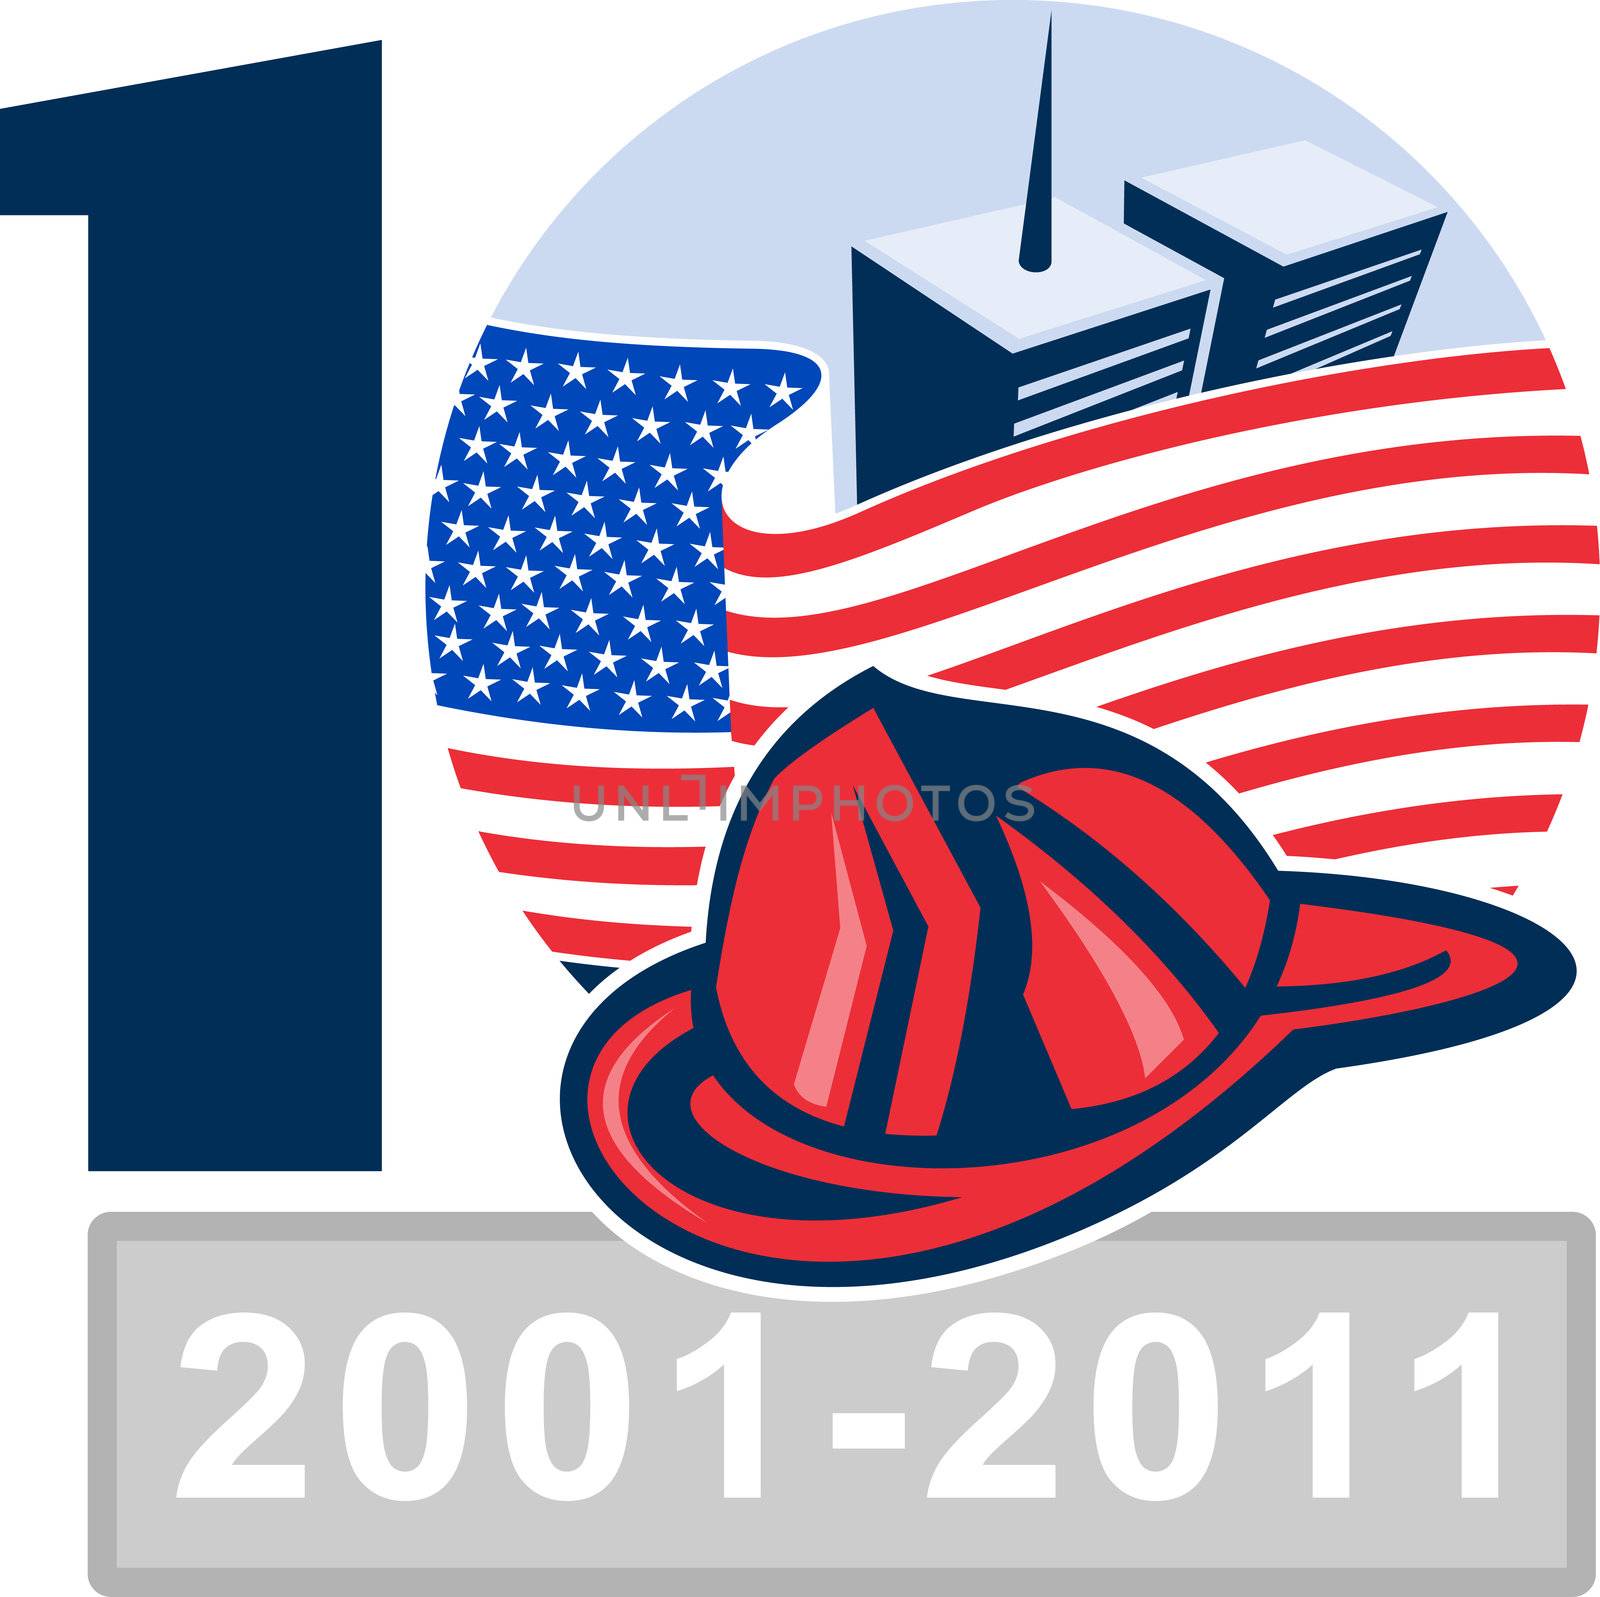 illustration of am unfurled american flag  with world trade center twin tower building in the 
background and firefighter helmet